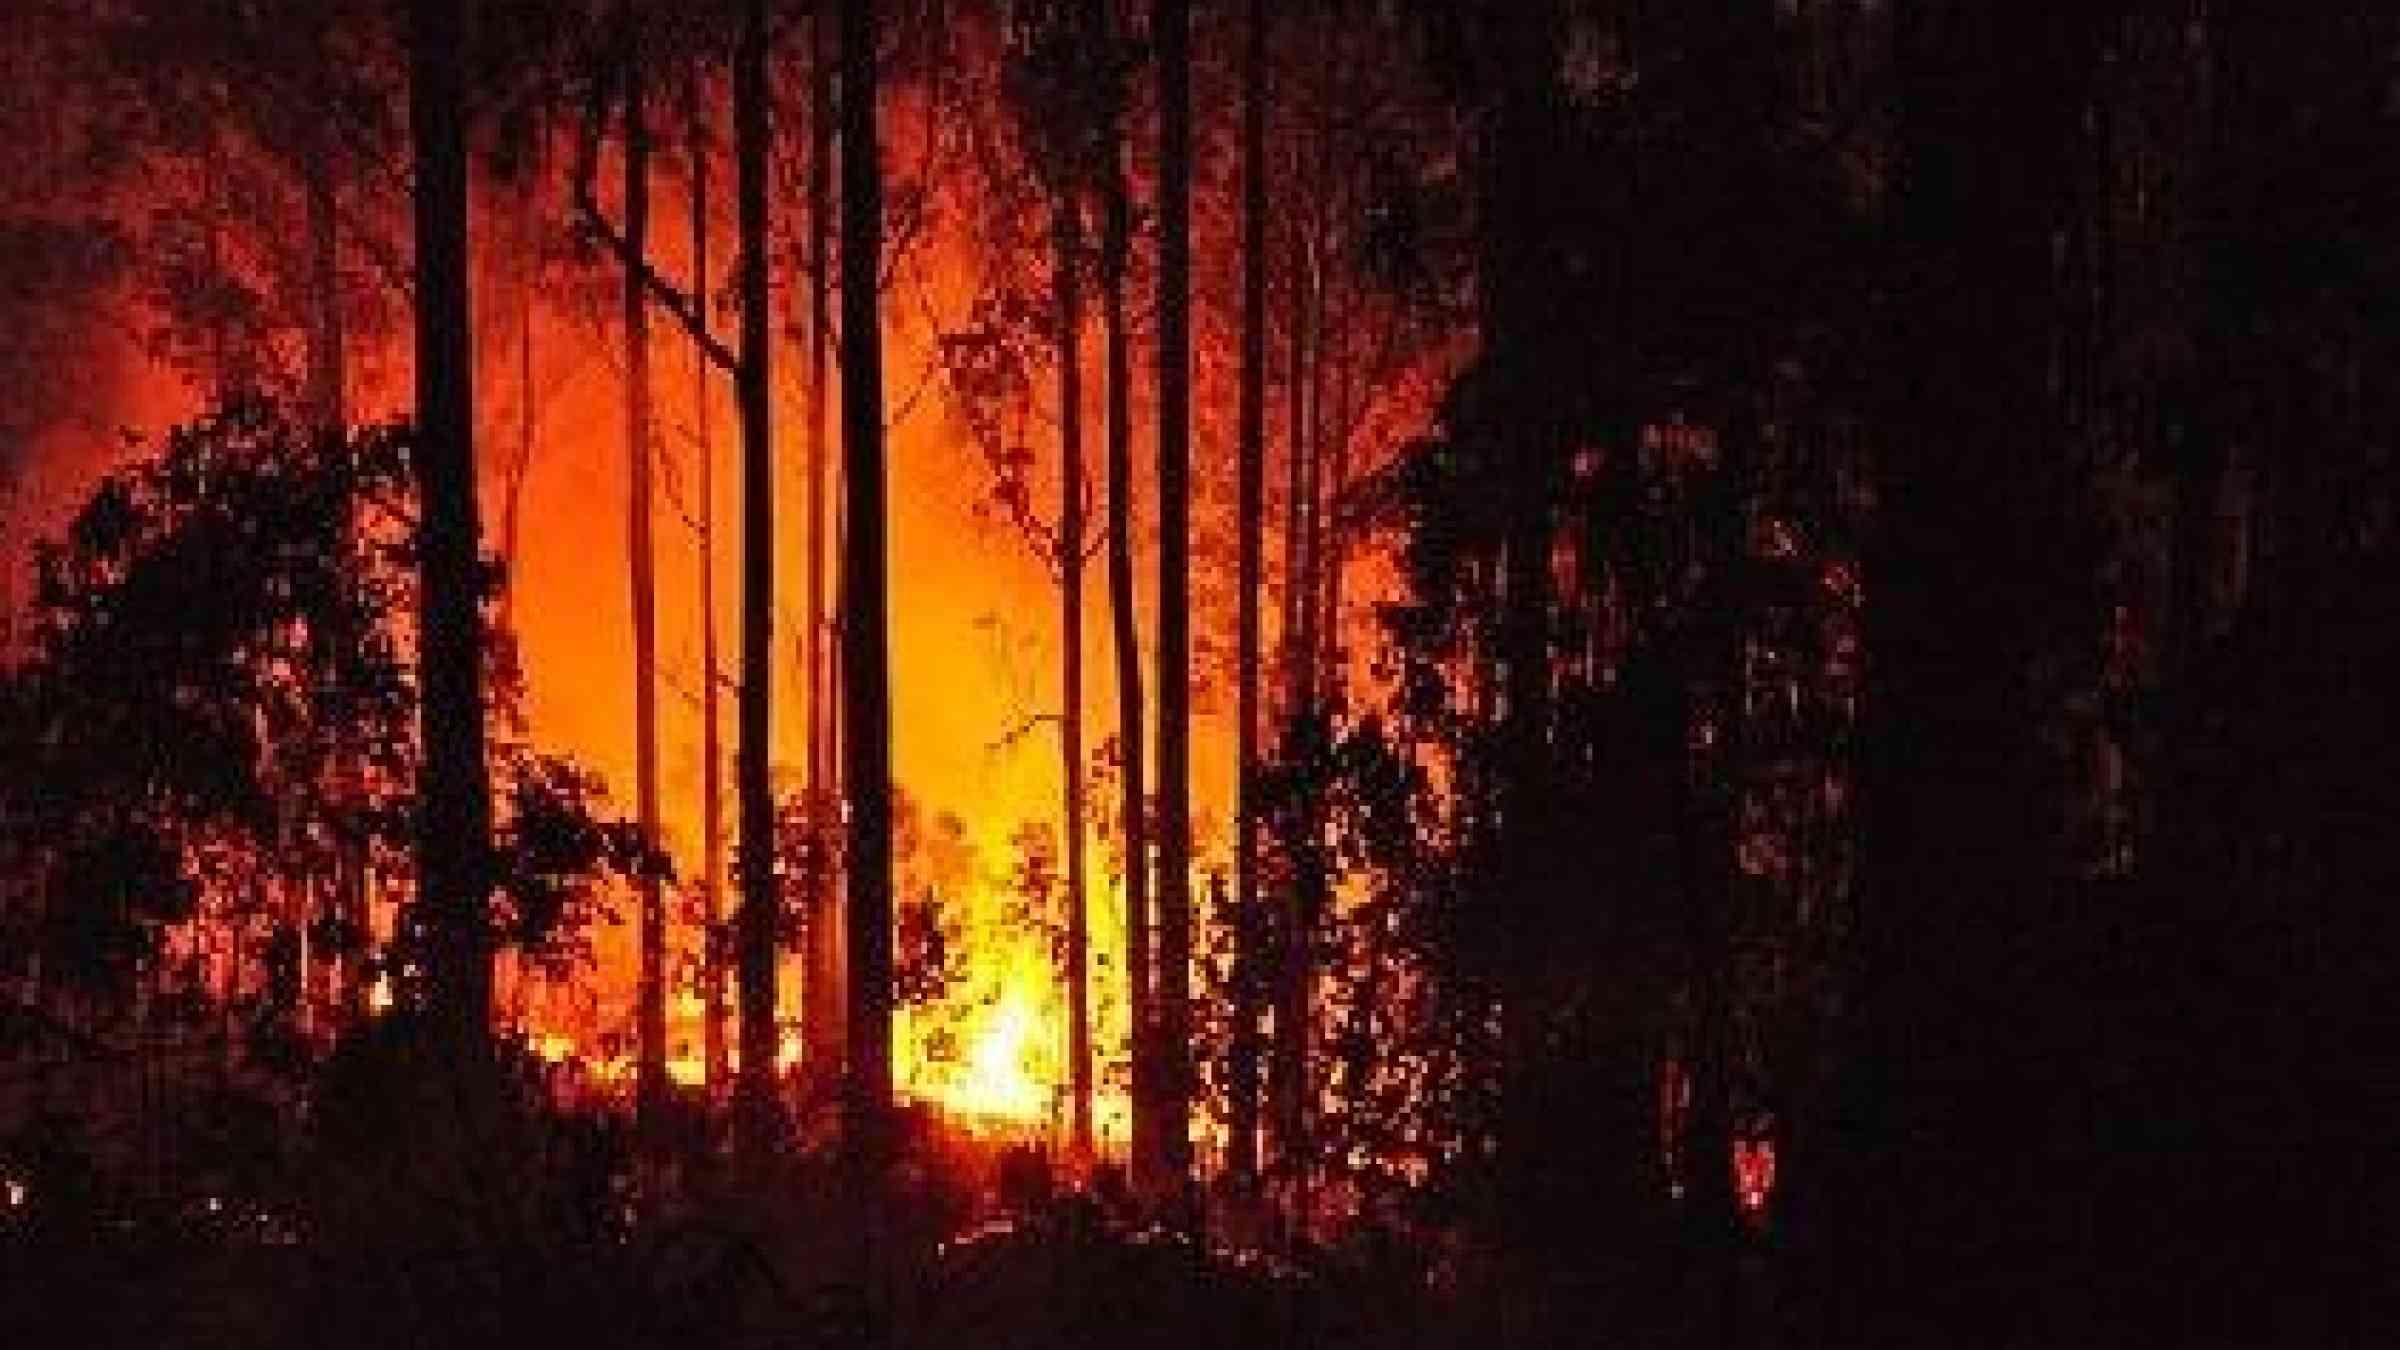 Forest fires in Madeira, Portugal in 2011 (Photo: anagh, via Wikimedia Commons)